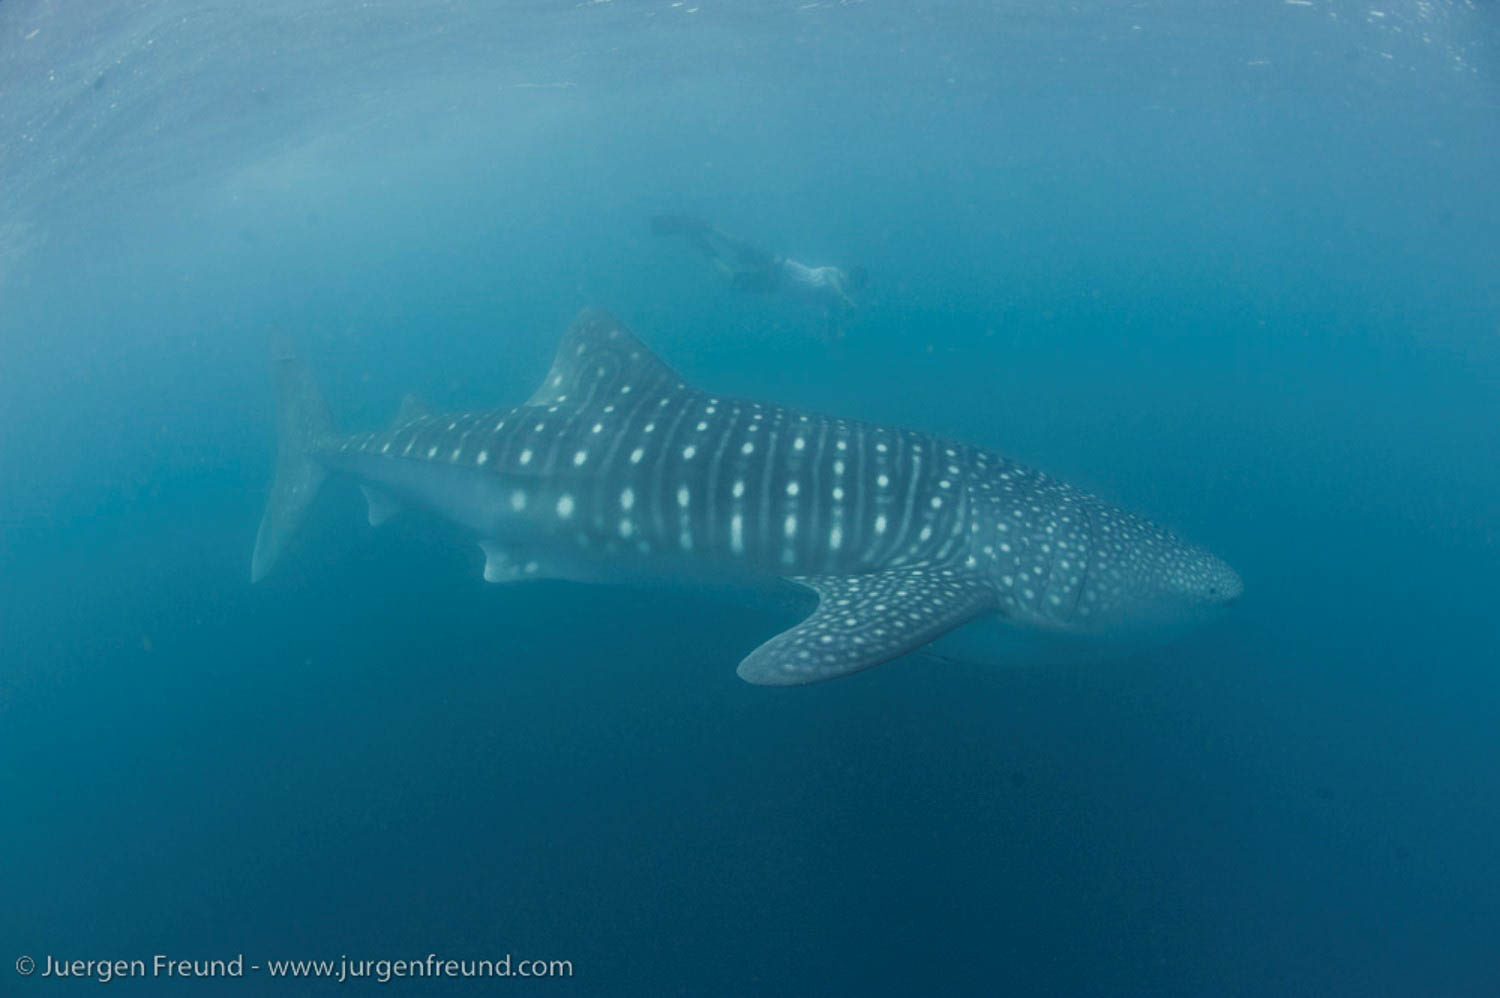 ‘Largest number in years’: Over 100 new whale sharks spotted in Donsol